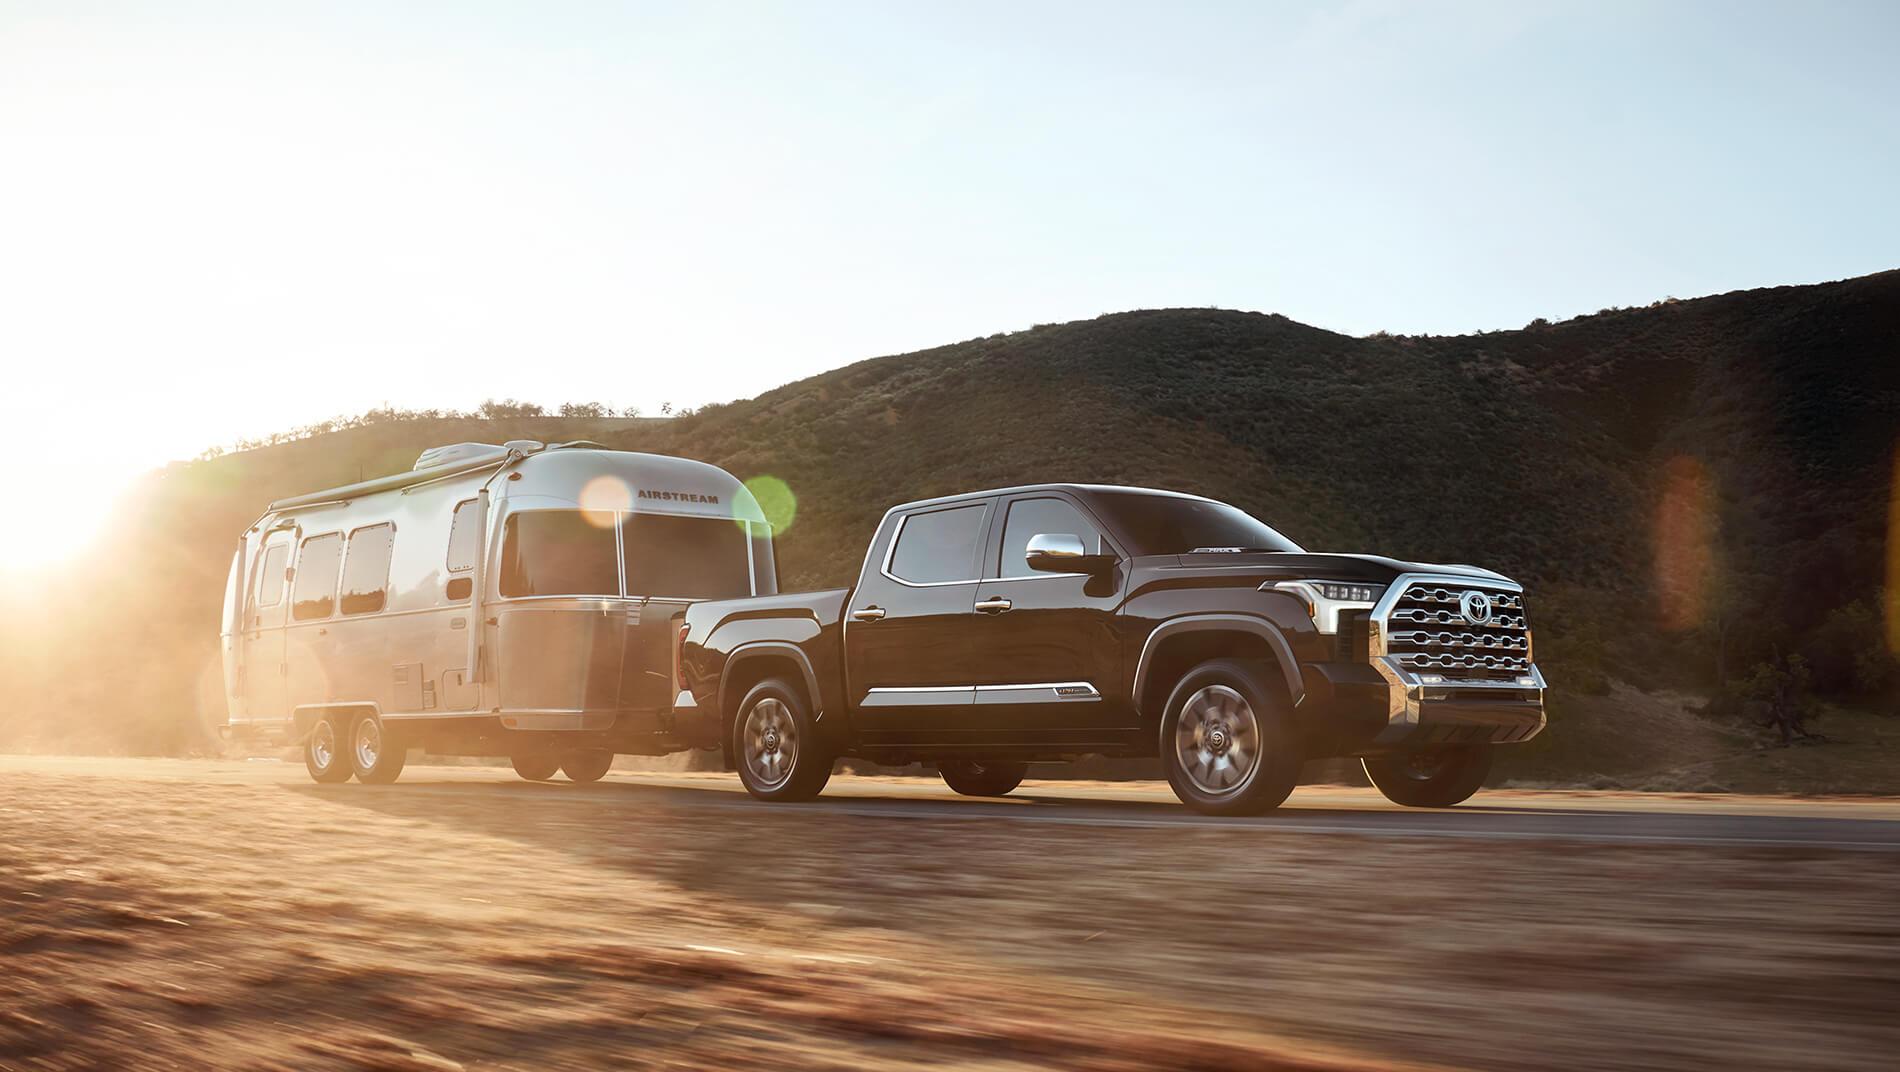 black Toyota Tundra pulling an airstream travel trailer in the mountains as the sun is going down